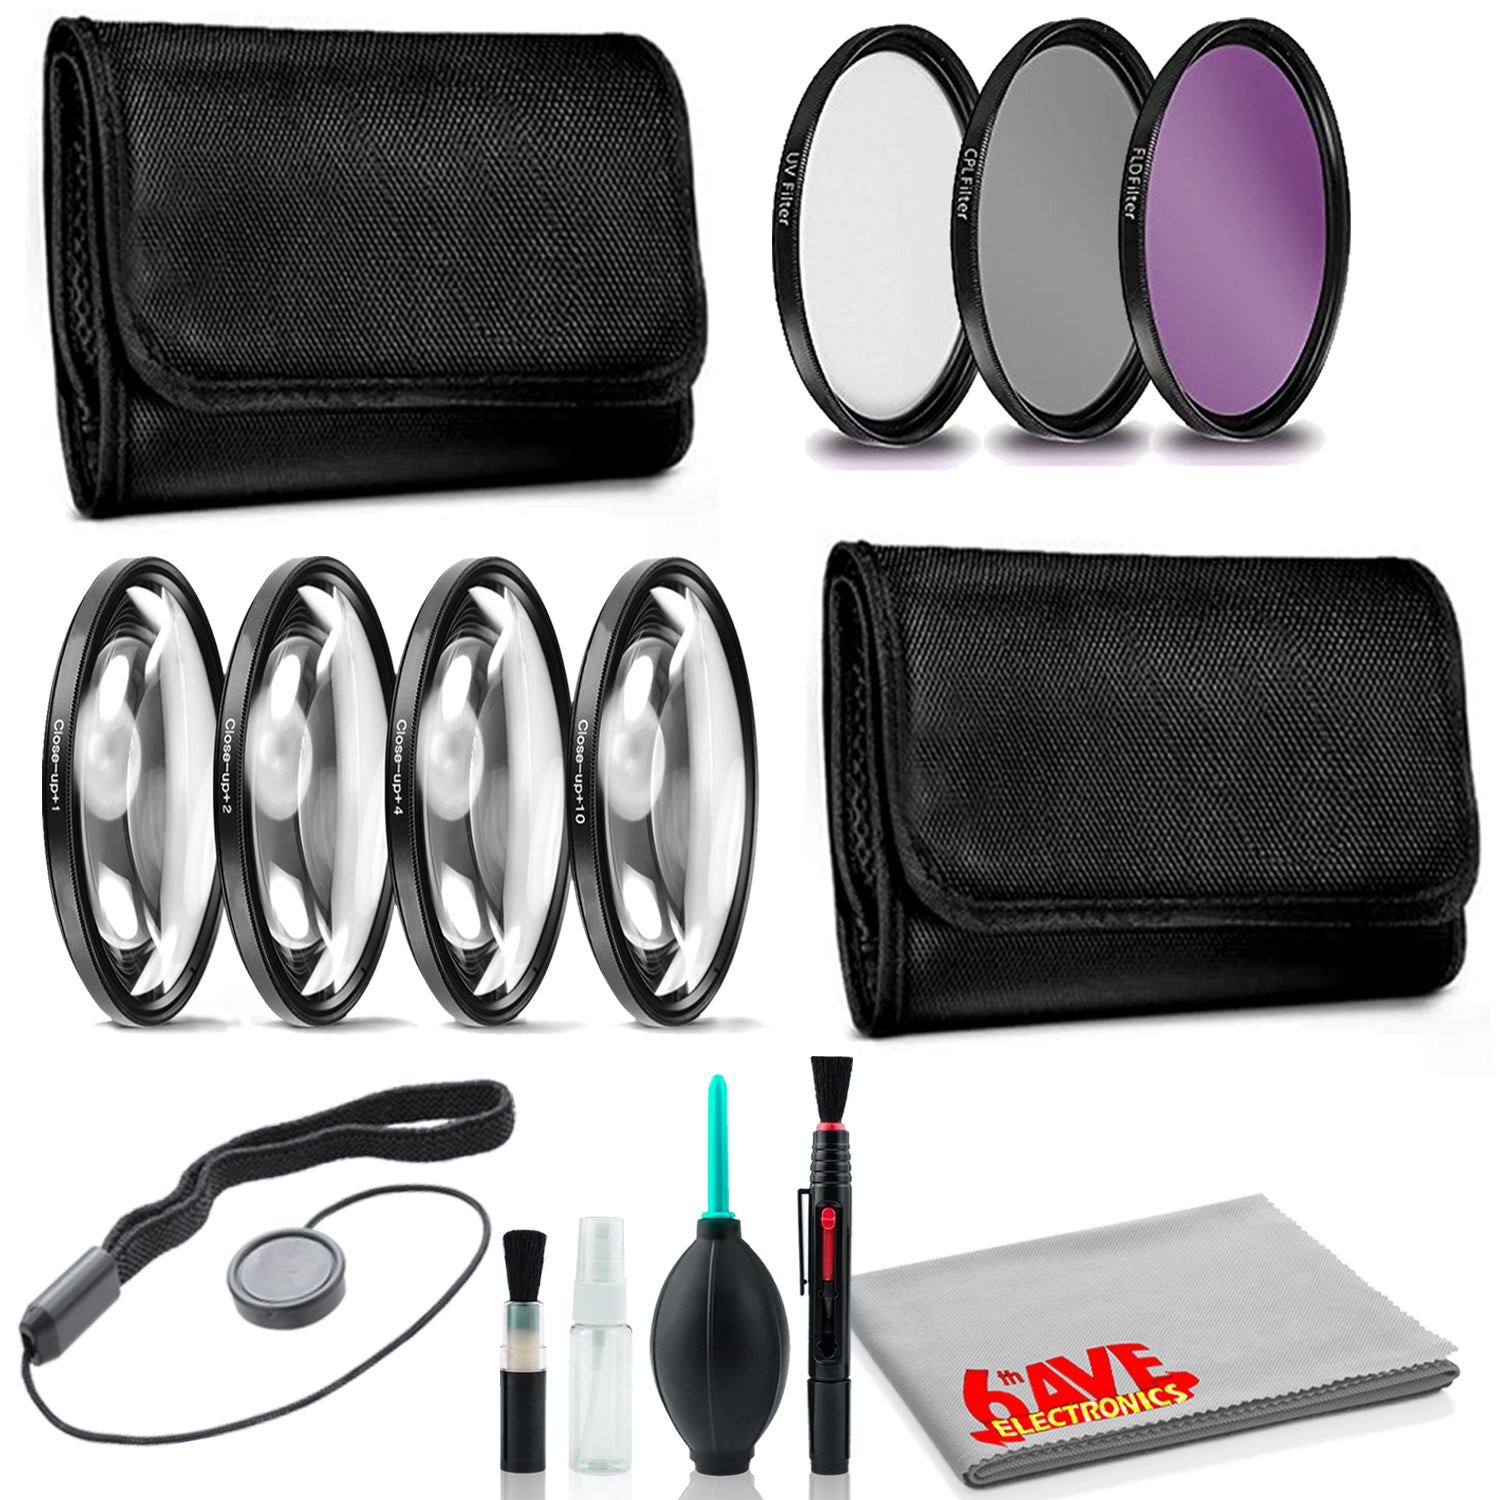 37mm Filter Kit Bundle with Close Up Lens Set, Cleaning Kit, and More